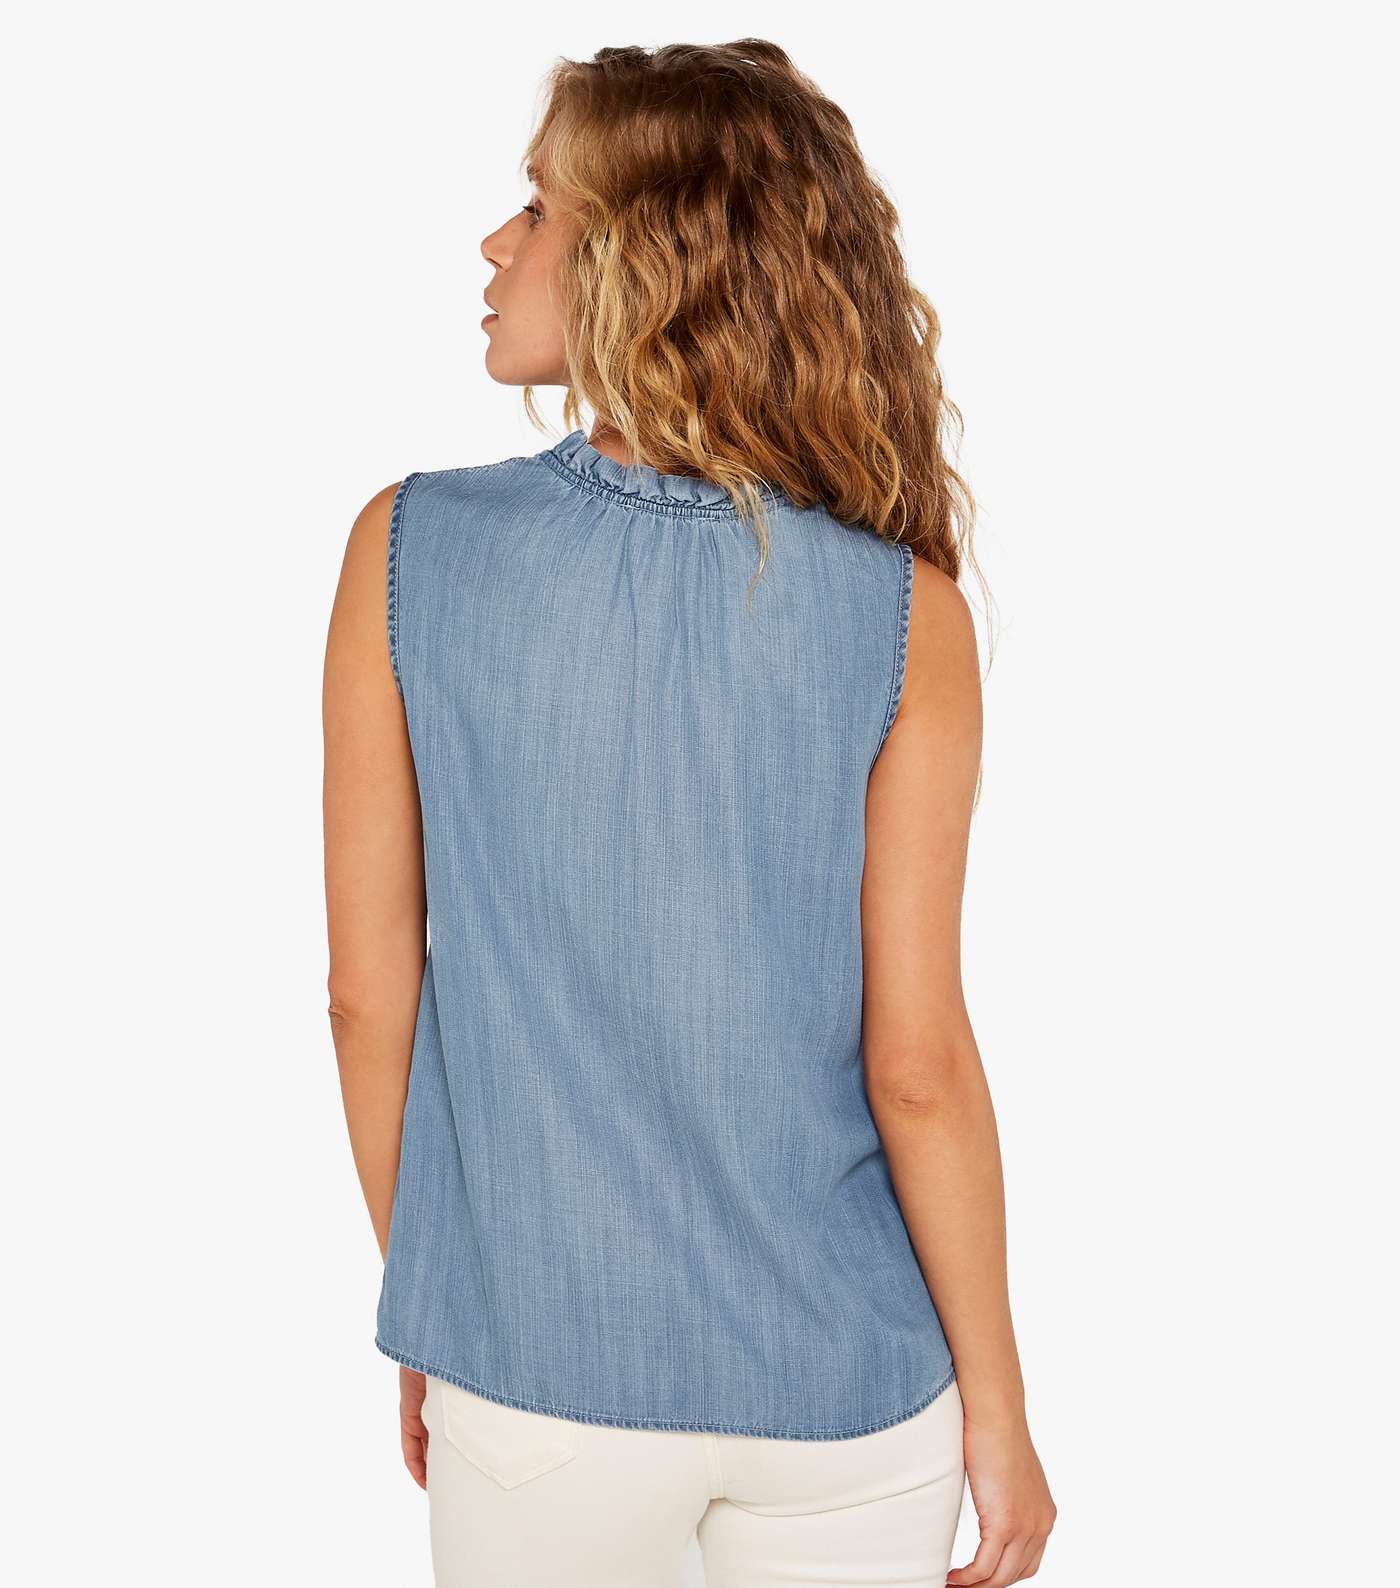 Apricot Pale Blue Denim Collared Top Image 3